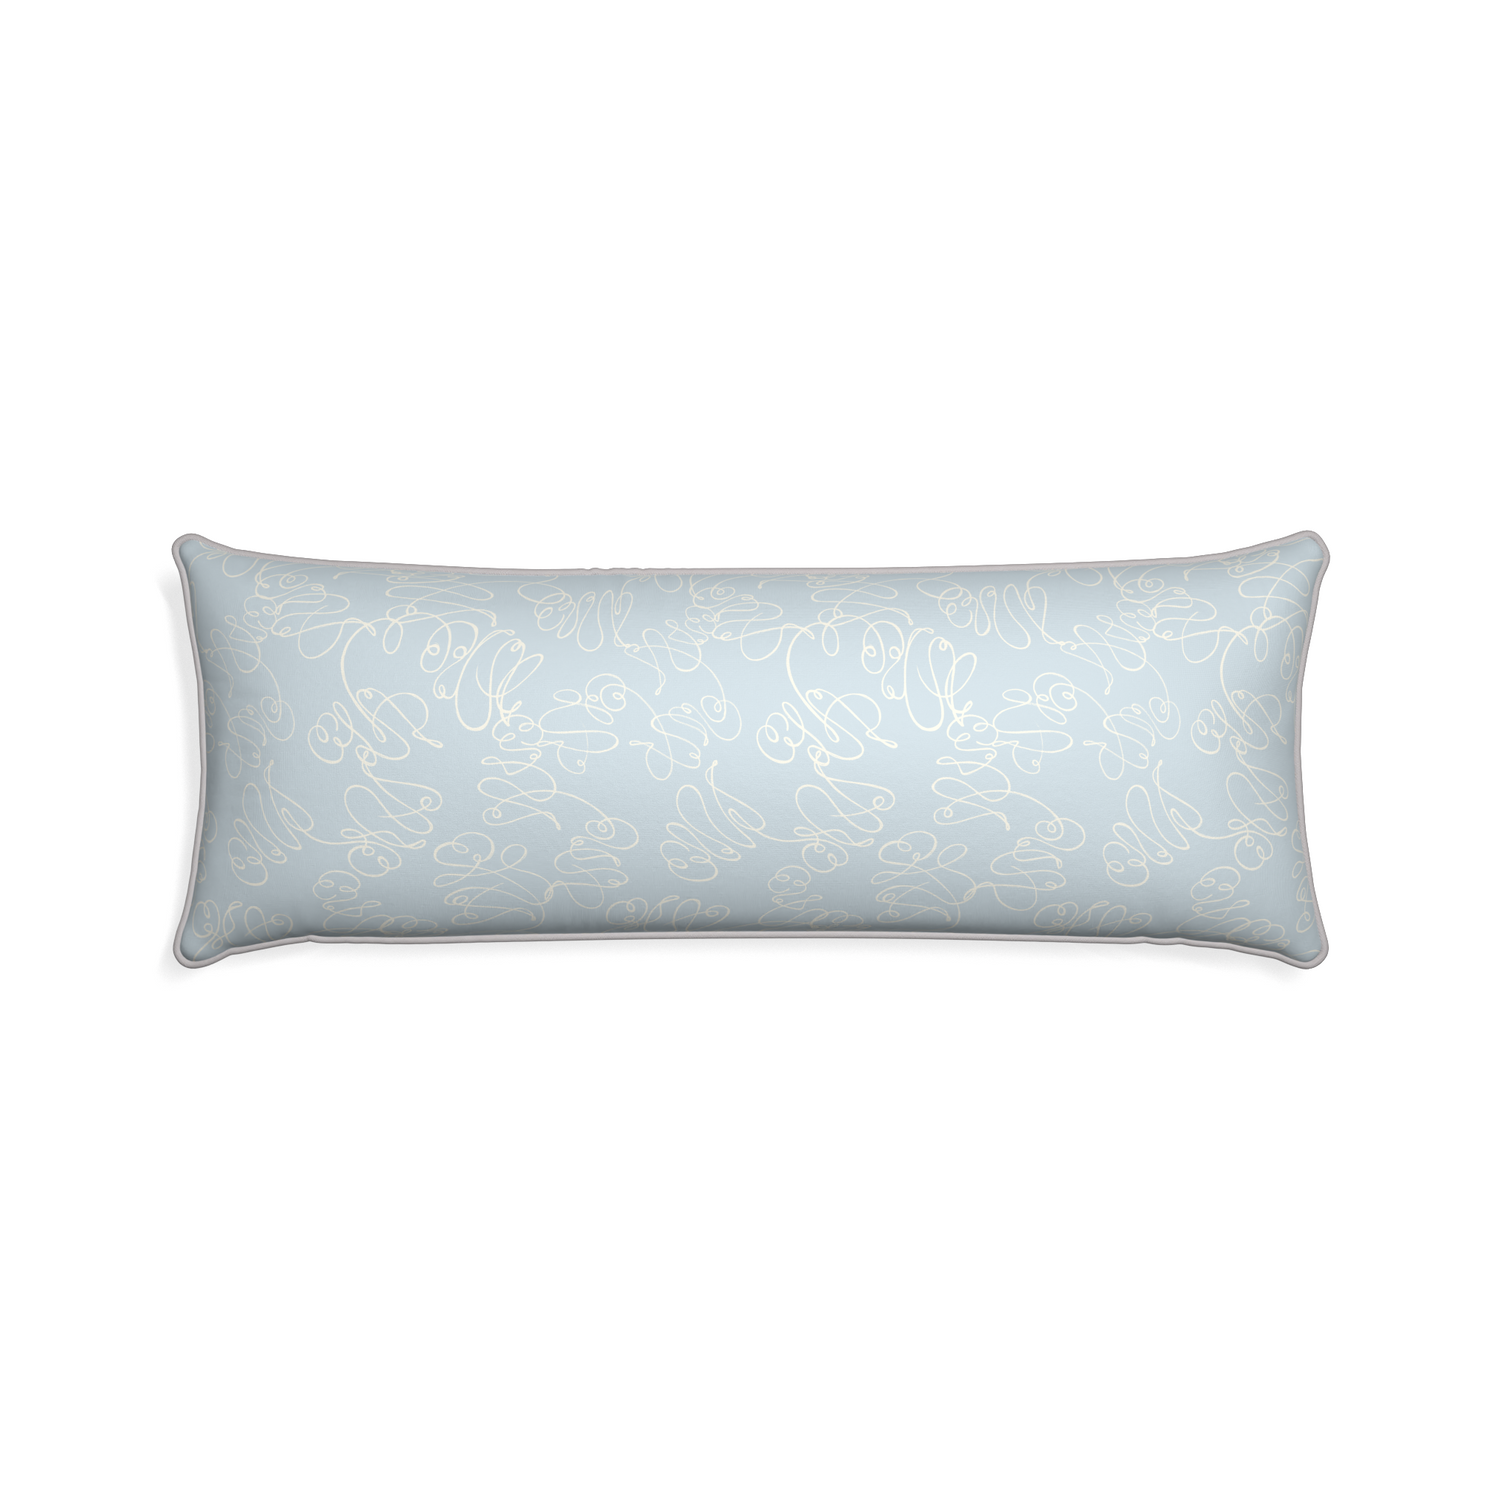 Xl-lumbar mirabella custom powder blue abstractpillow with pebble piping on white background